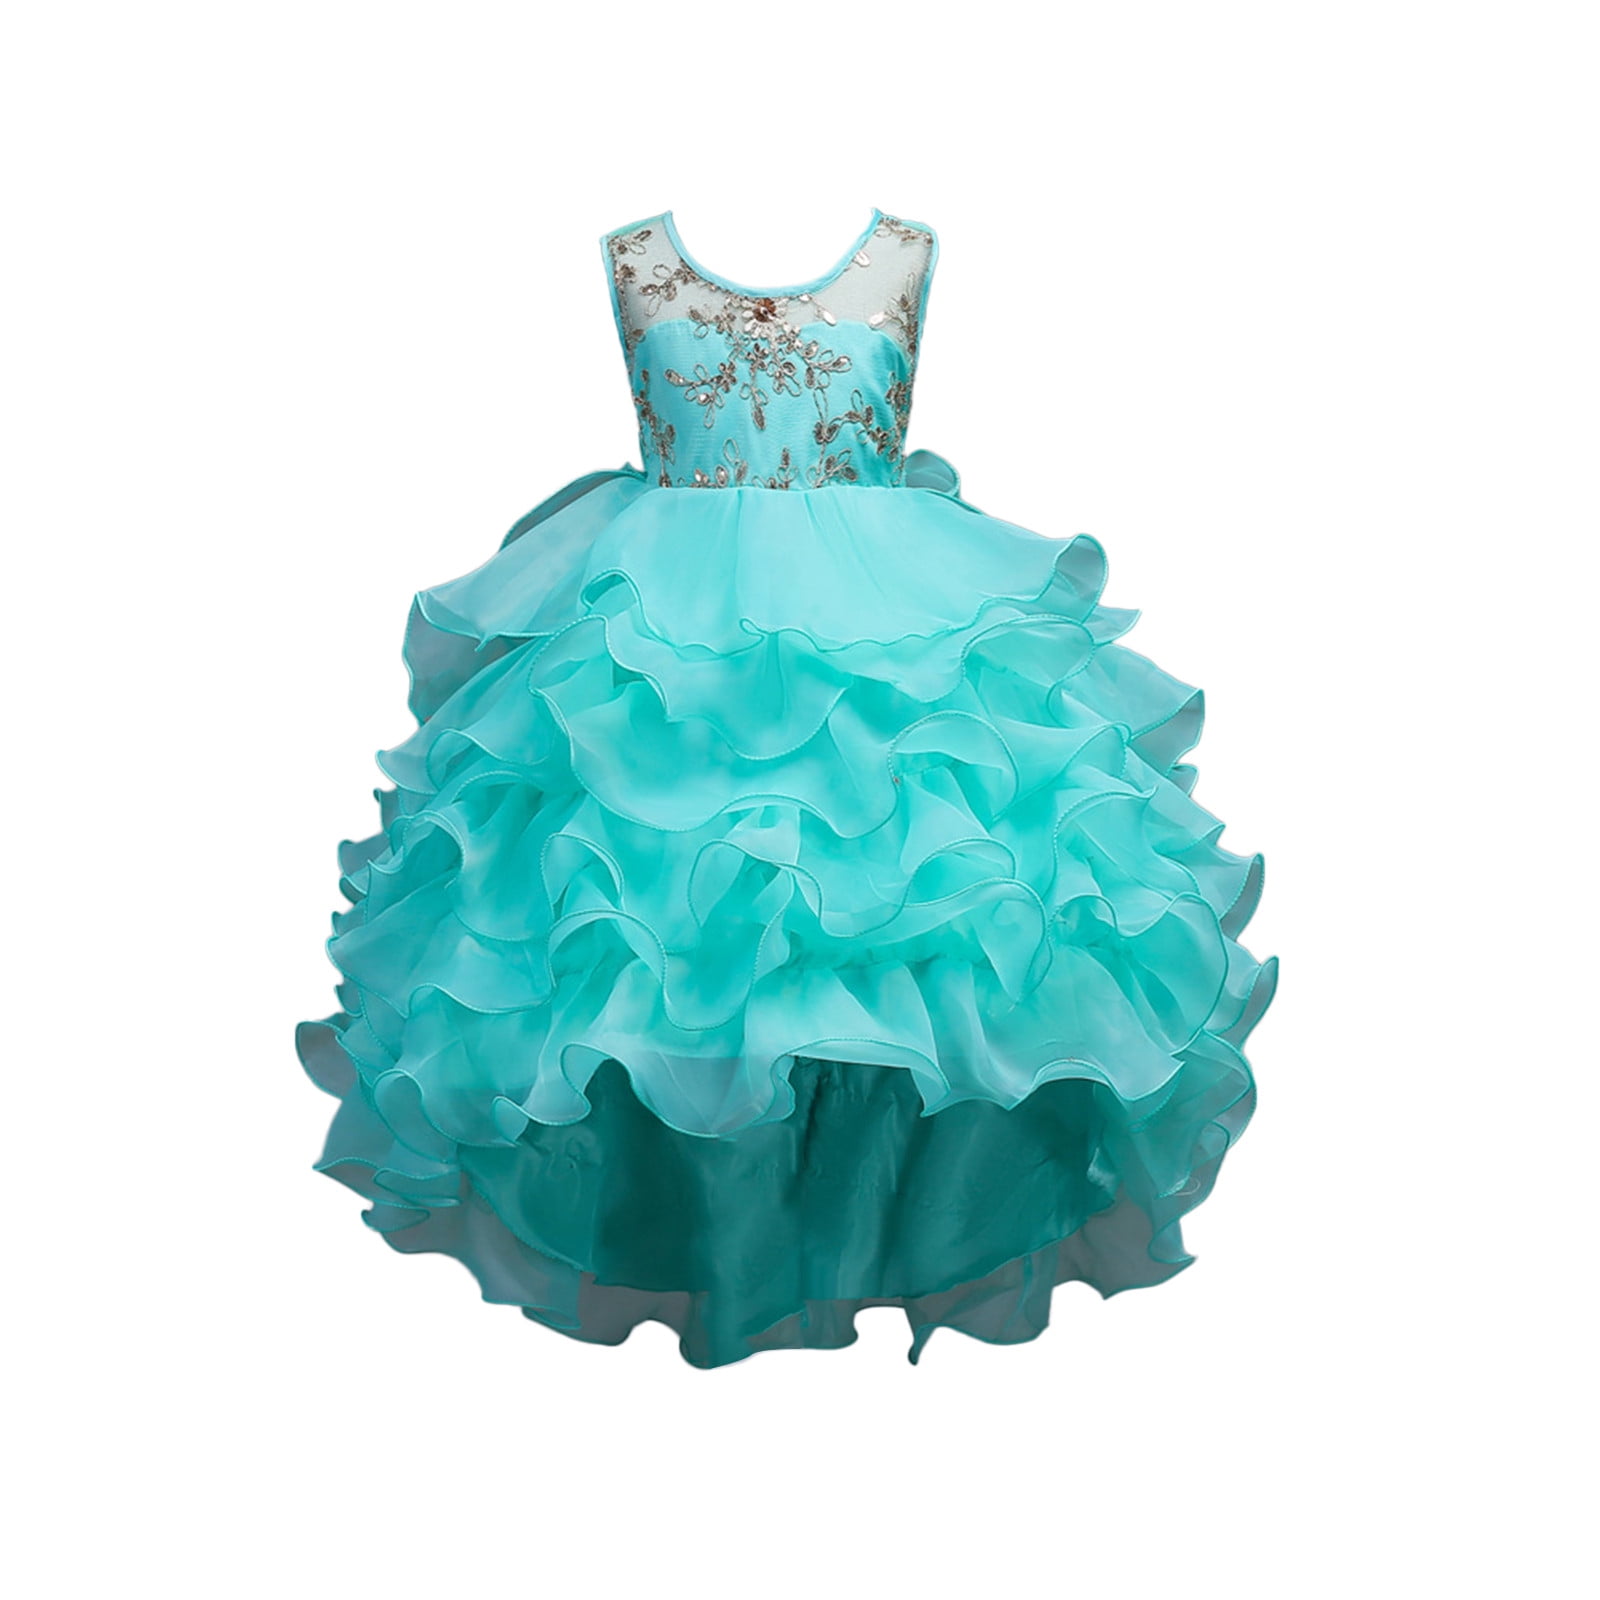 Girls Skater Dress Kids Party Dresses With Free Belt Age 7 8 9 10 11 12 13  Years | eBay